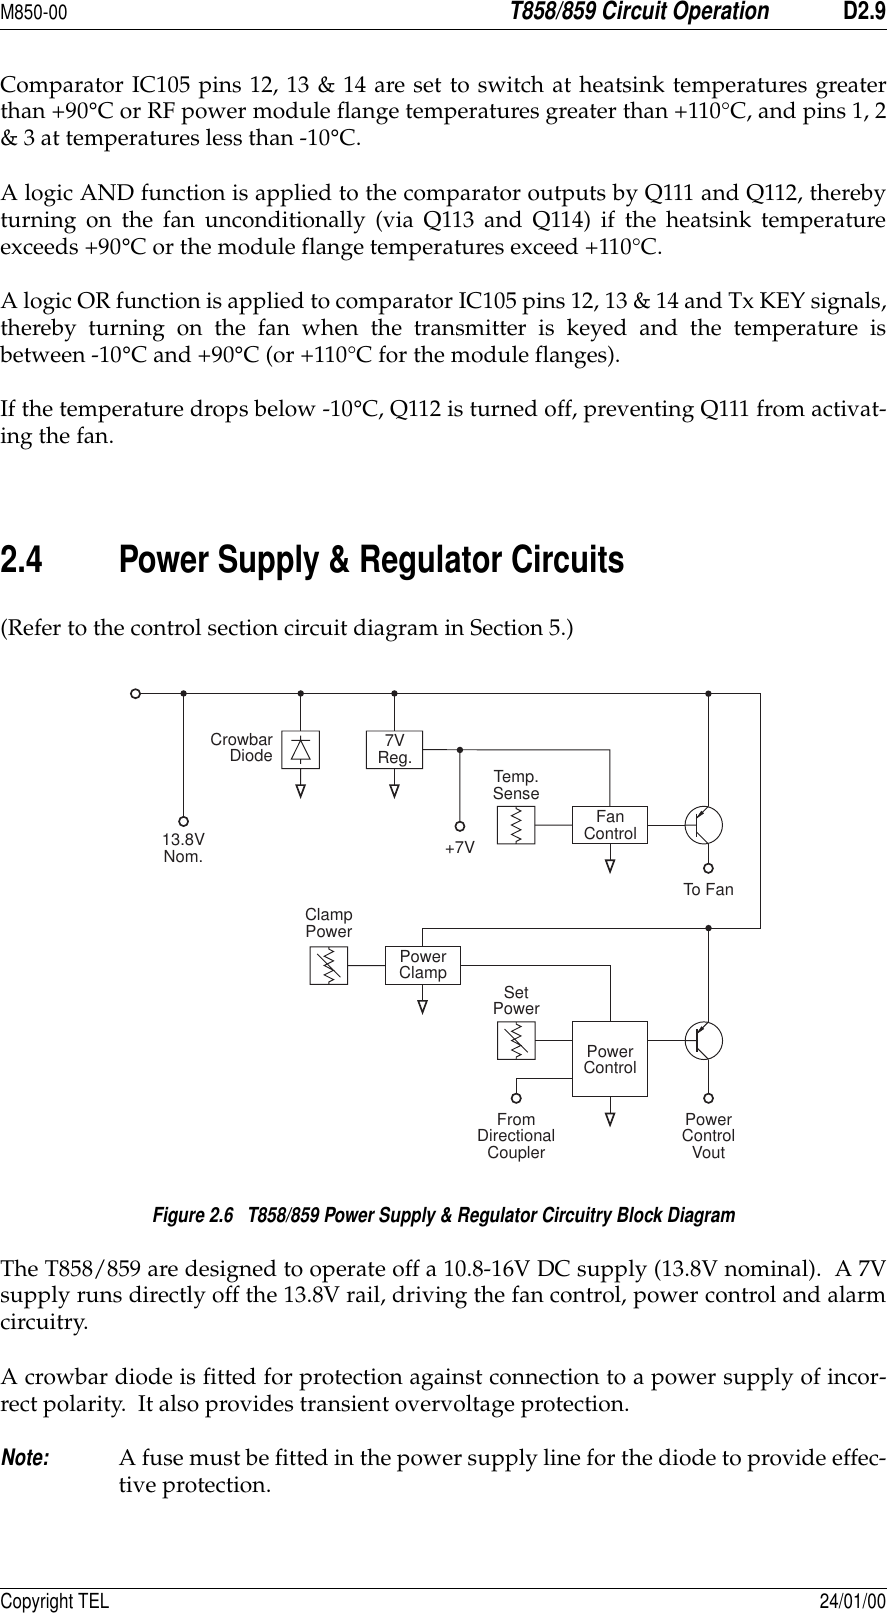 M850-00T858/859 Circuit OperationD2.9Copyright TEL 24/01/00Comparator IC105 pins 12, 13 &amp; 14 are set to switch at heatsink temperatures greaterthan +90°C or RF power module flange temperatures greater than +110°C, and pins 1, 2&amp; 3 at temperatures less than -10°C.A logic AND function is applied to the comparator outputs by Q111 and Q112, therebyturning on the fan unconditionally (via Q113 and Q114) if the heatsink temperatureexceeds +90°C or the module flange temperatures exceed +110°C.A logic OR function is applied to comparator IC105 pins 12, 13 &amp; 14 and Tx KEY signals,thereby turning on the fan when the transmitter is keyed and the temperature isbetween -10°C and +90°C (or +110°C for the module flanges).If the temperature drops below -10°C, Q112 is turned off, preventing Q111 from activat-ing the fan.2.4 Power Supply &amp; Regulator Circuits(Refer to the control section circuit diagram in Section 5.)Figure 2.6   T858/859 Power Supply &amp; Regulator Circuitry Block DiagramThe T858/859 are designed to operate off a 10.8-16V DC supply (13.8V nominal).  A 7Vsupply runs directly off the 13.8V rail, driving the fan control, power control and alarmcircuitry.A crowbar diode is fitted for protection against connection to a power supply of incor-rect polarity.  It also provides transient overvoltage protection.Note:A fuse must be fitted in the power supply line for the diode to provide effec-tive protection.7VReg.FanControlPowerClampPowerControlCrowbarDiodeTemp.SenseTo Fan+7VClampPowerFromDirectionalCouplerPowerControlVoutSetPower13.8VNom.